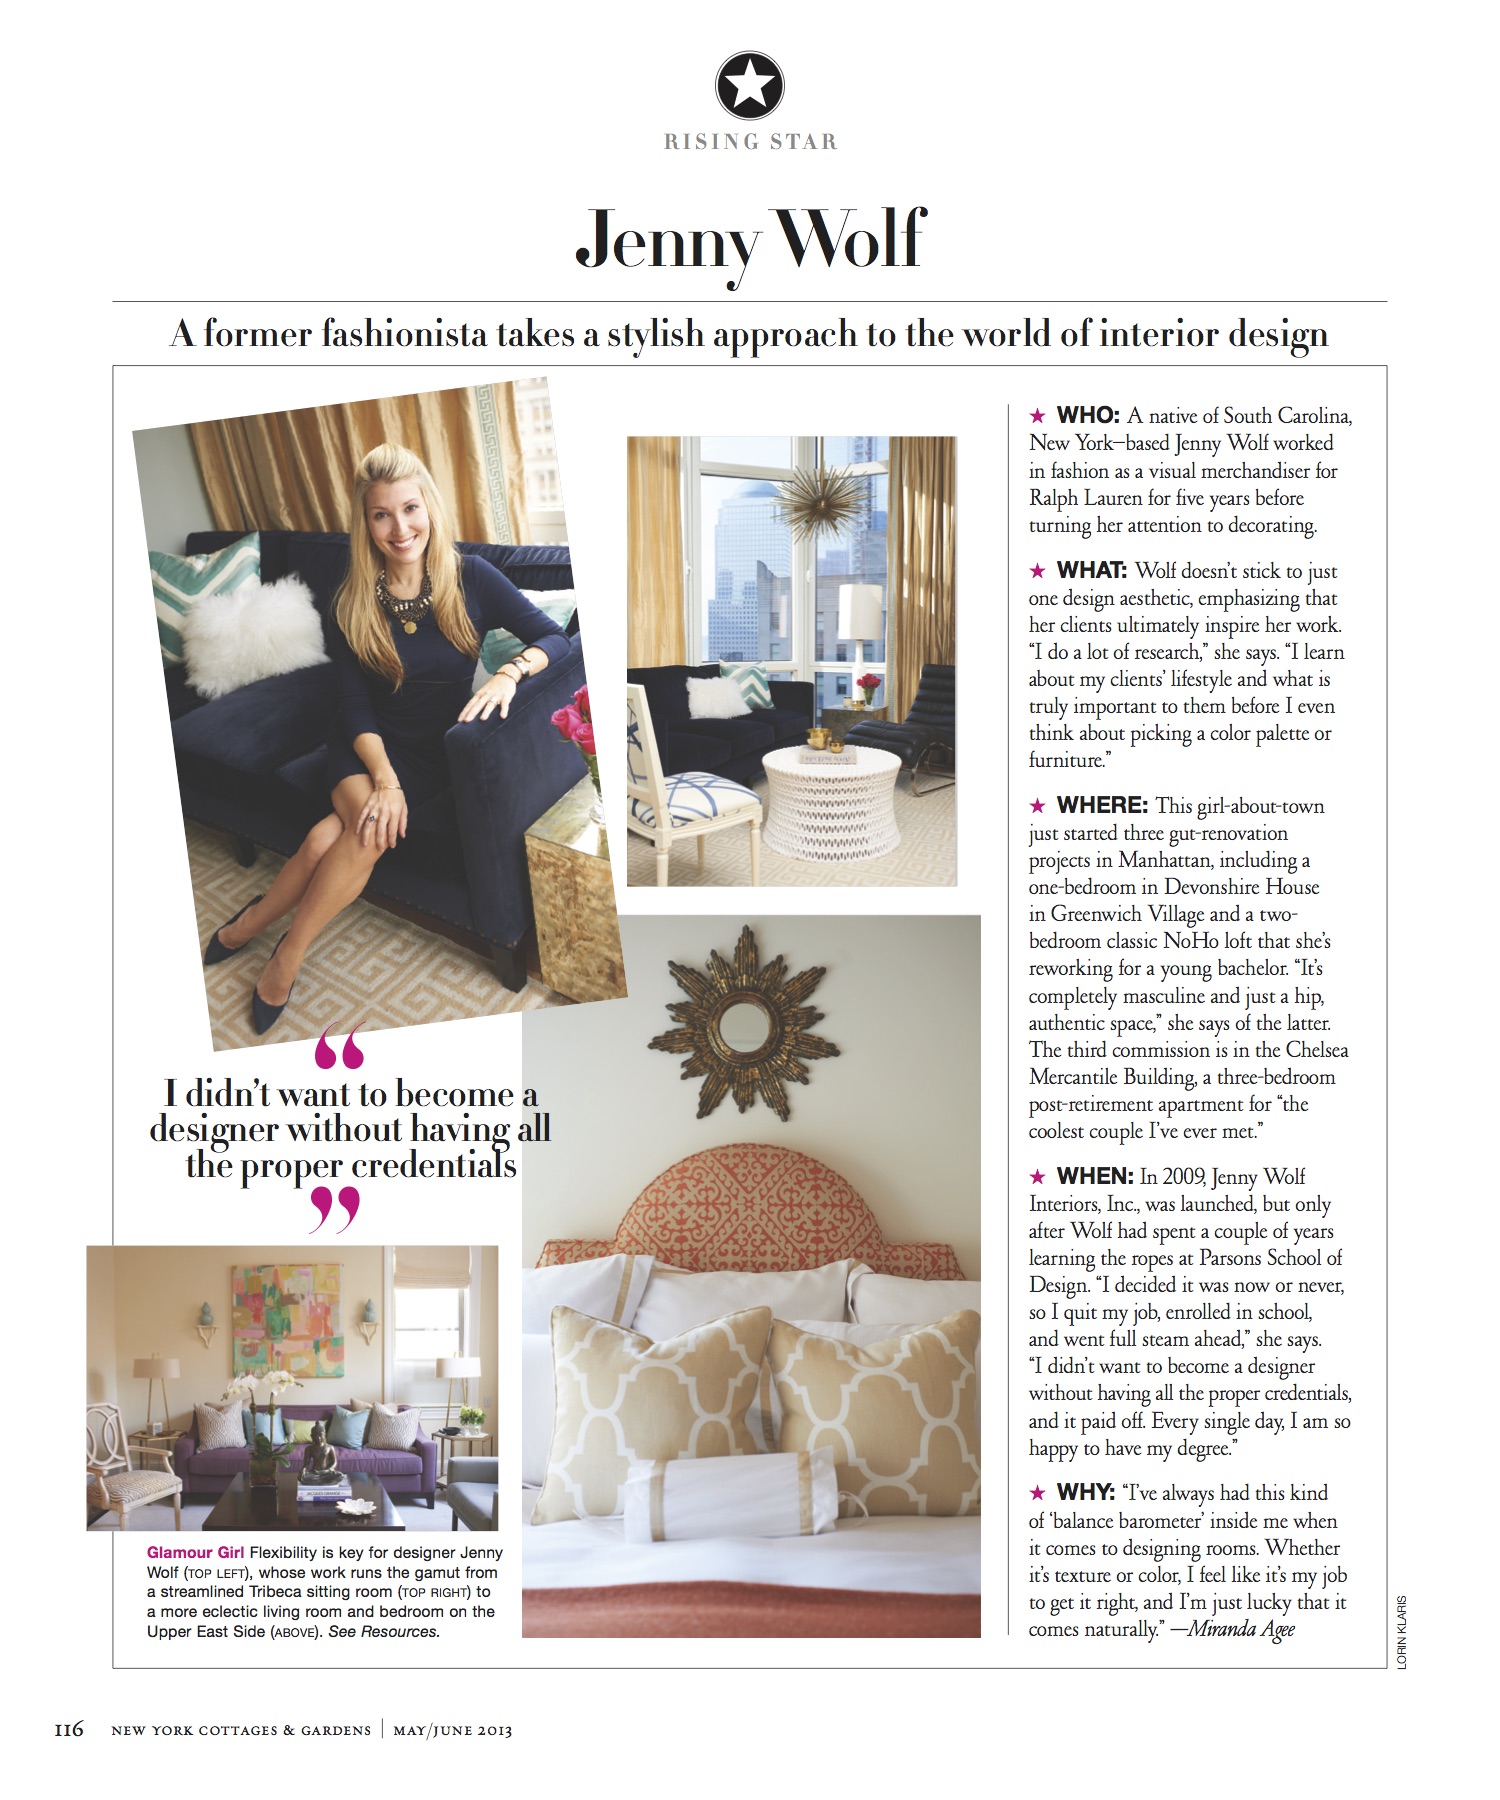 New York Cottages & Gardens, Jenny Wolf Interiors, May/June 2013